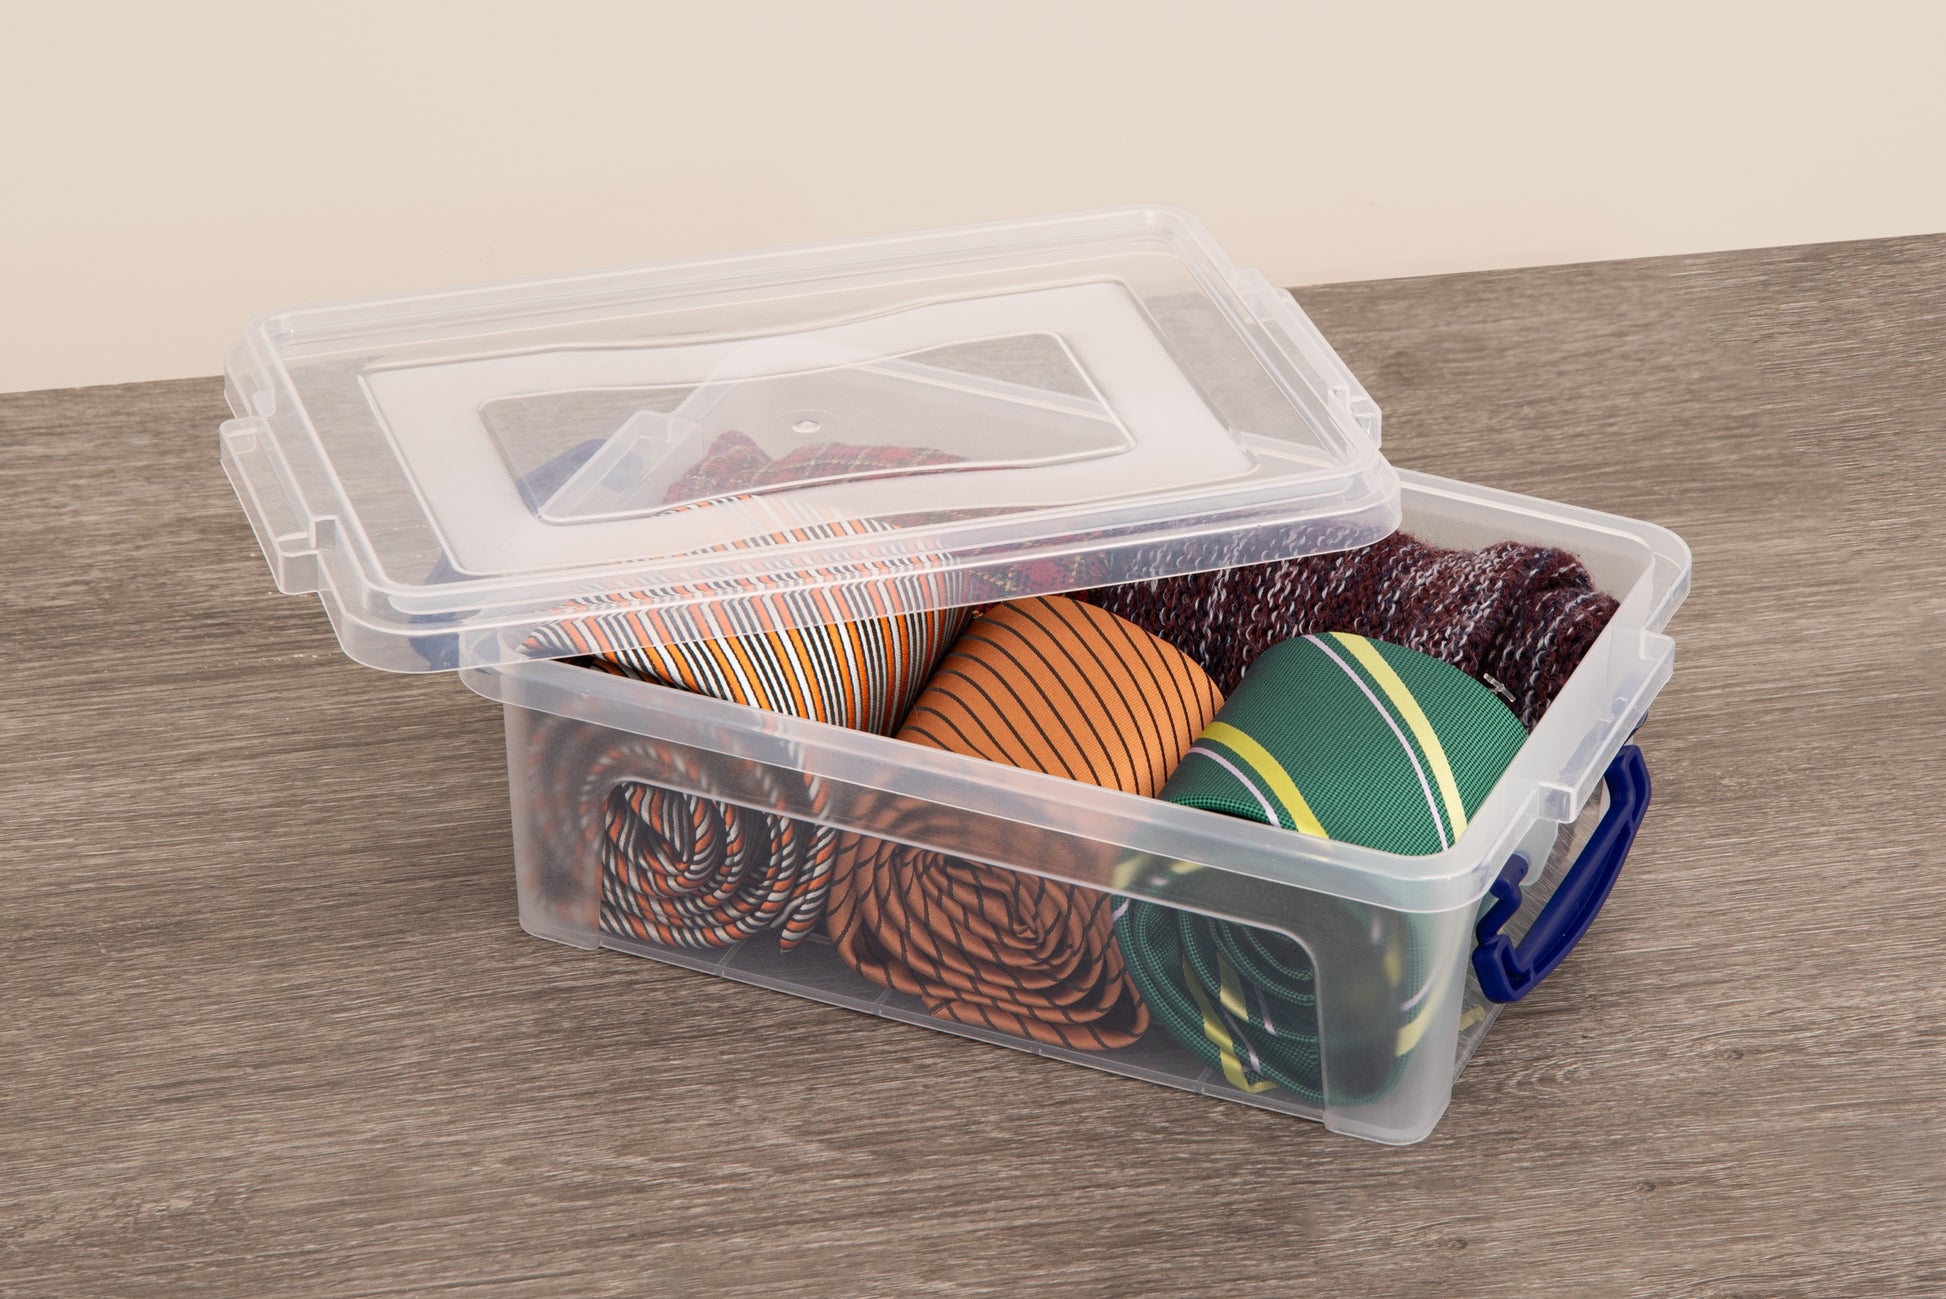  Superio Clear Storage Box with Lid, Plastic Container